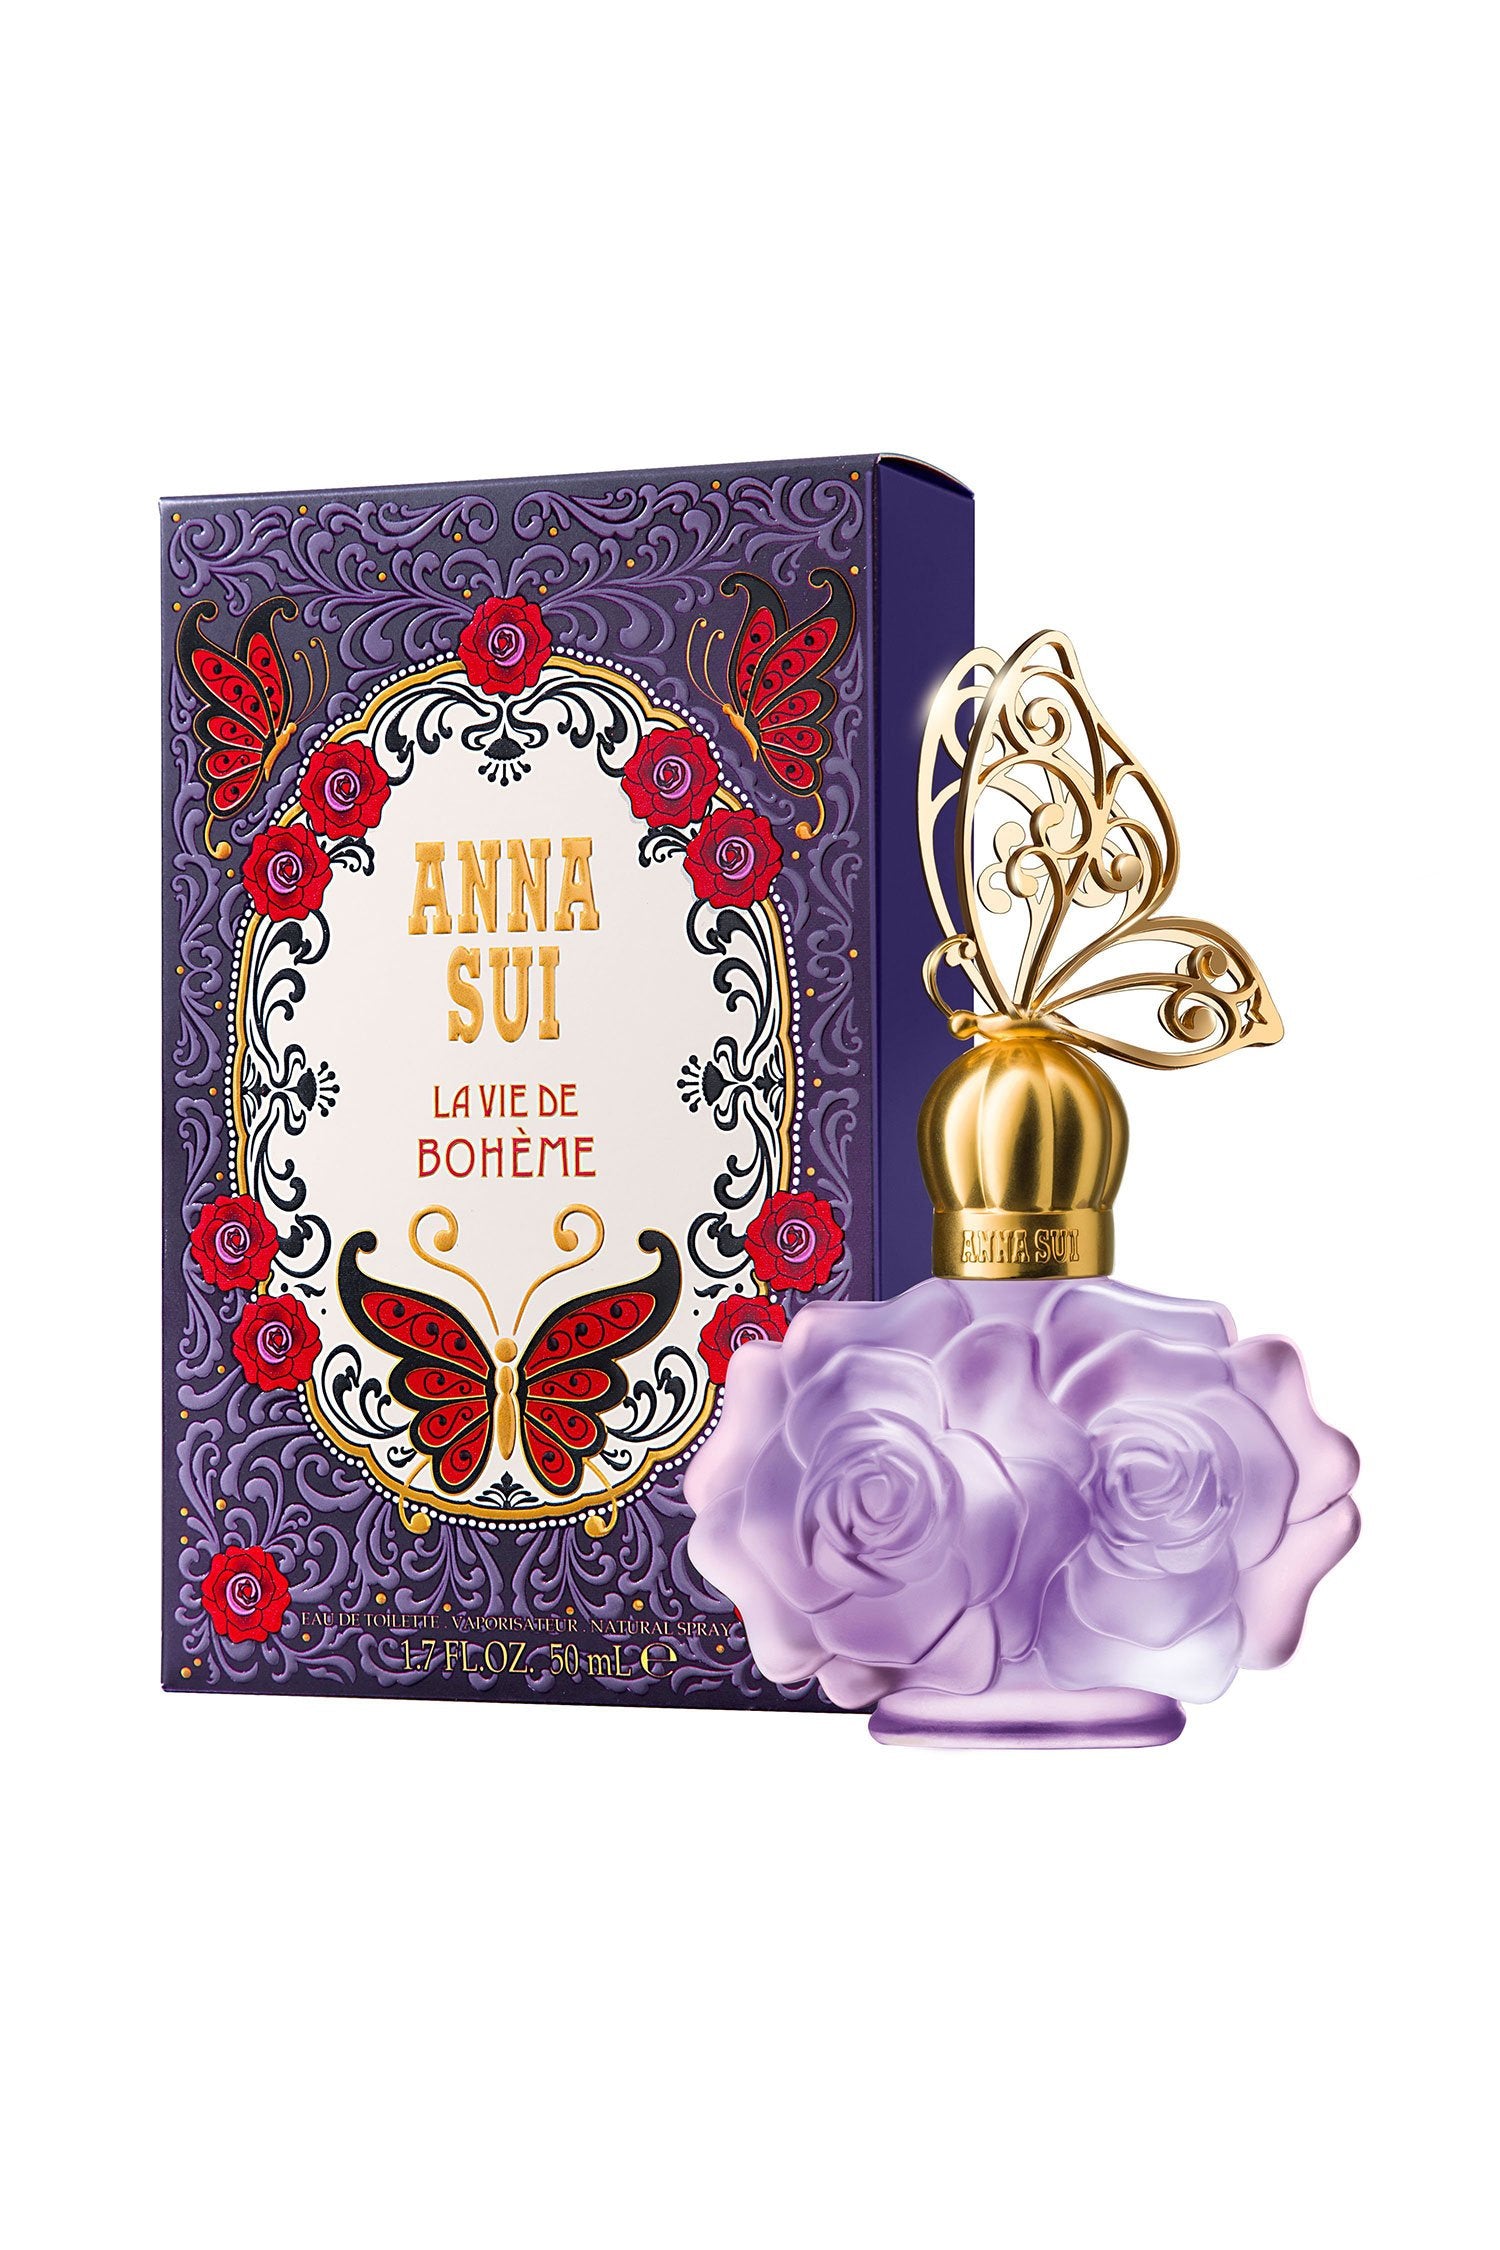 Violet roses bottle, cap of the sprayer is a golden butterfly on a dome, art deco box design